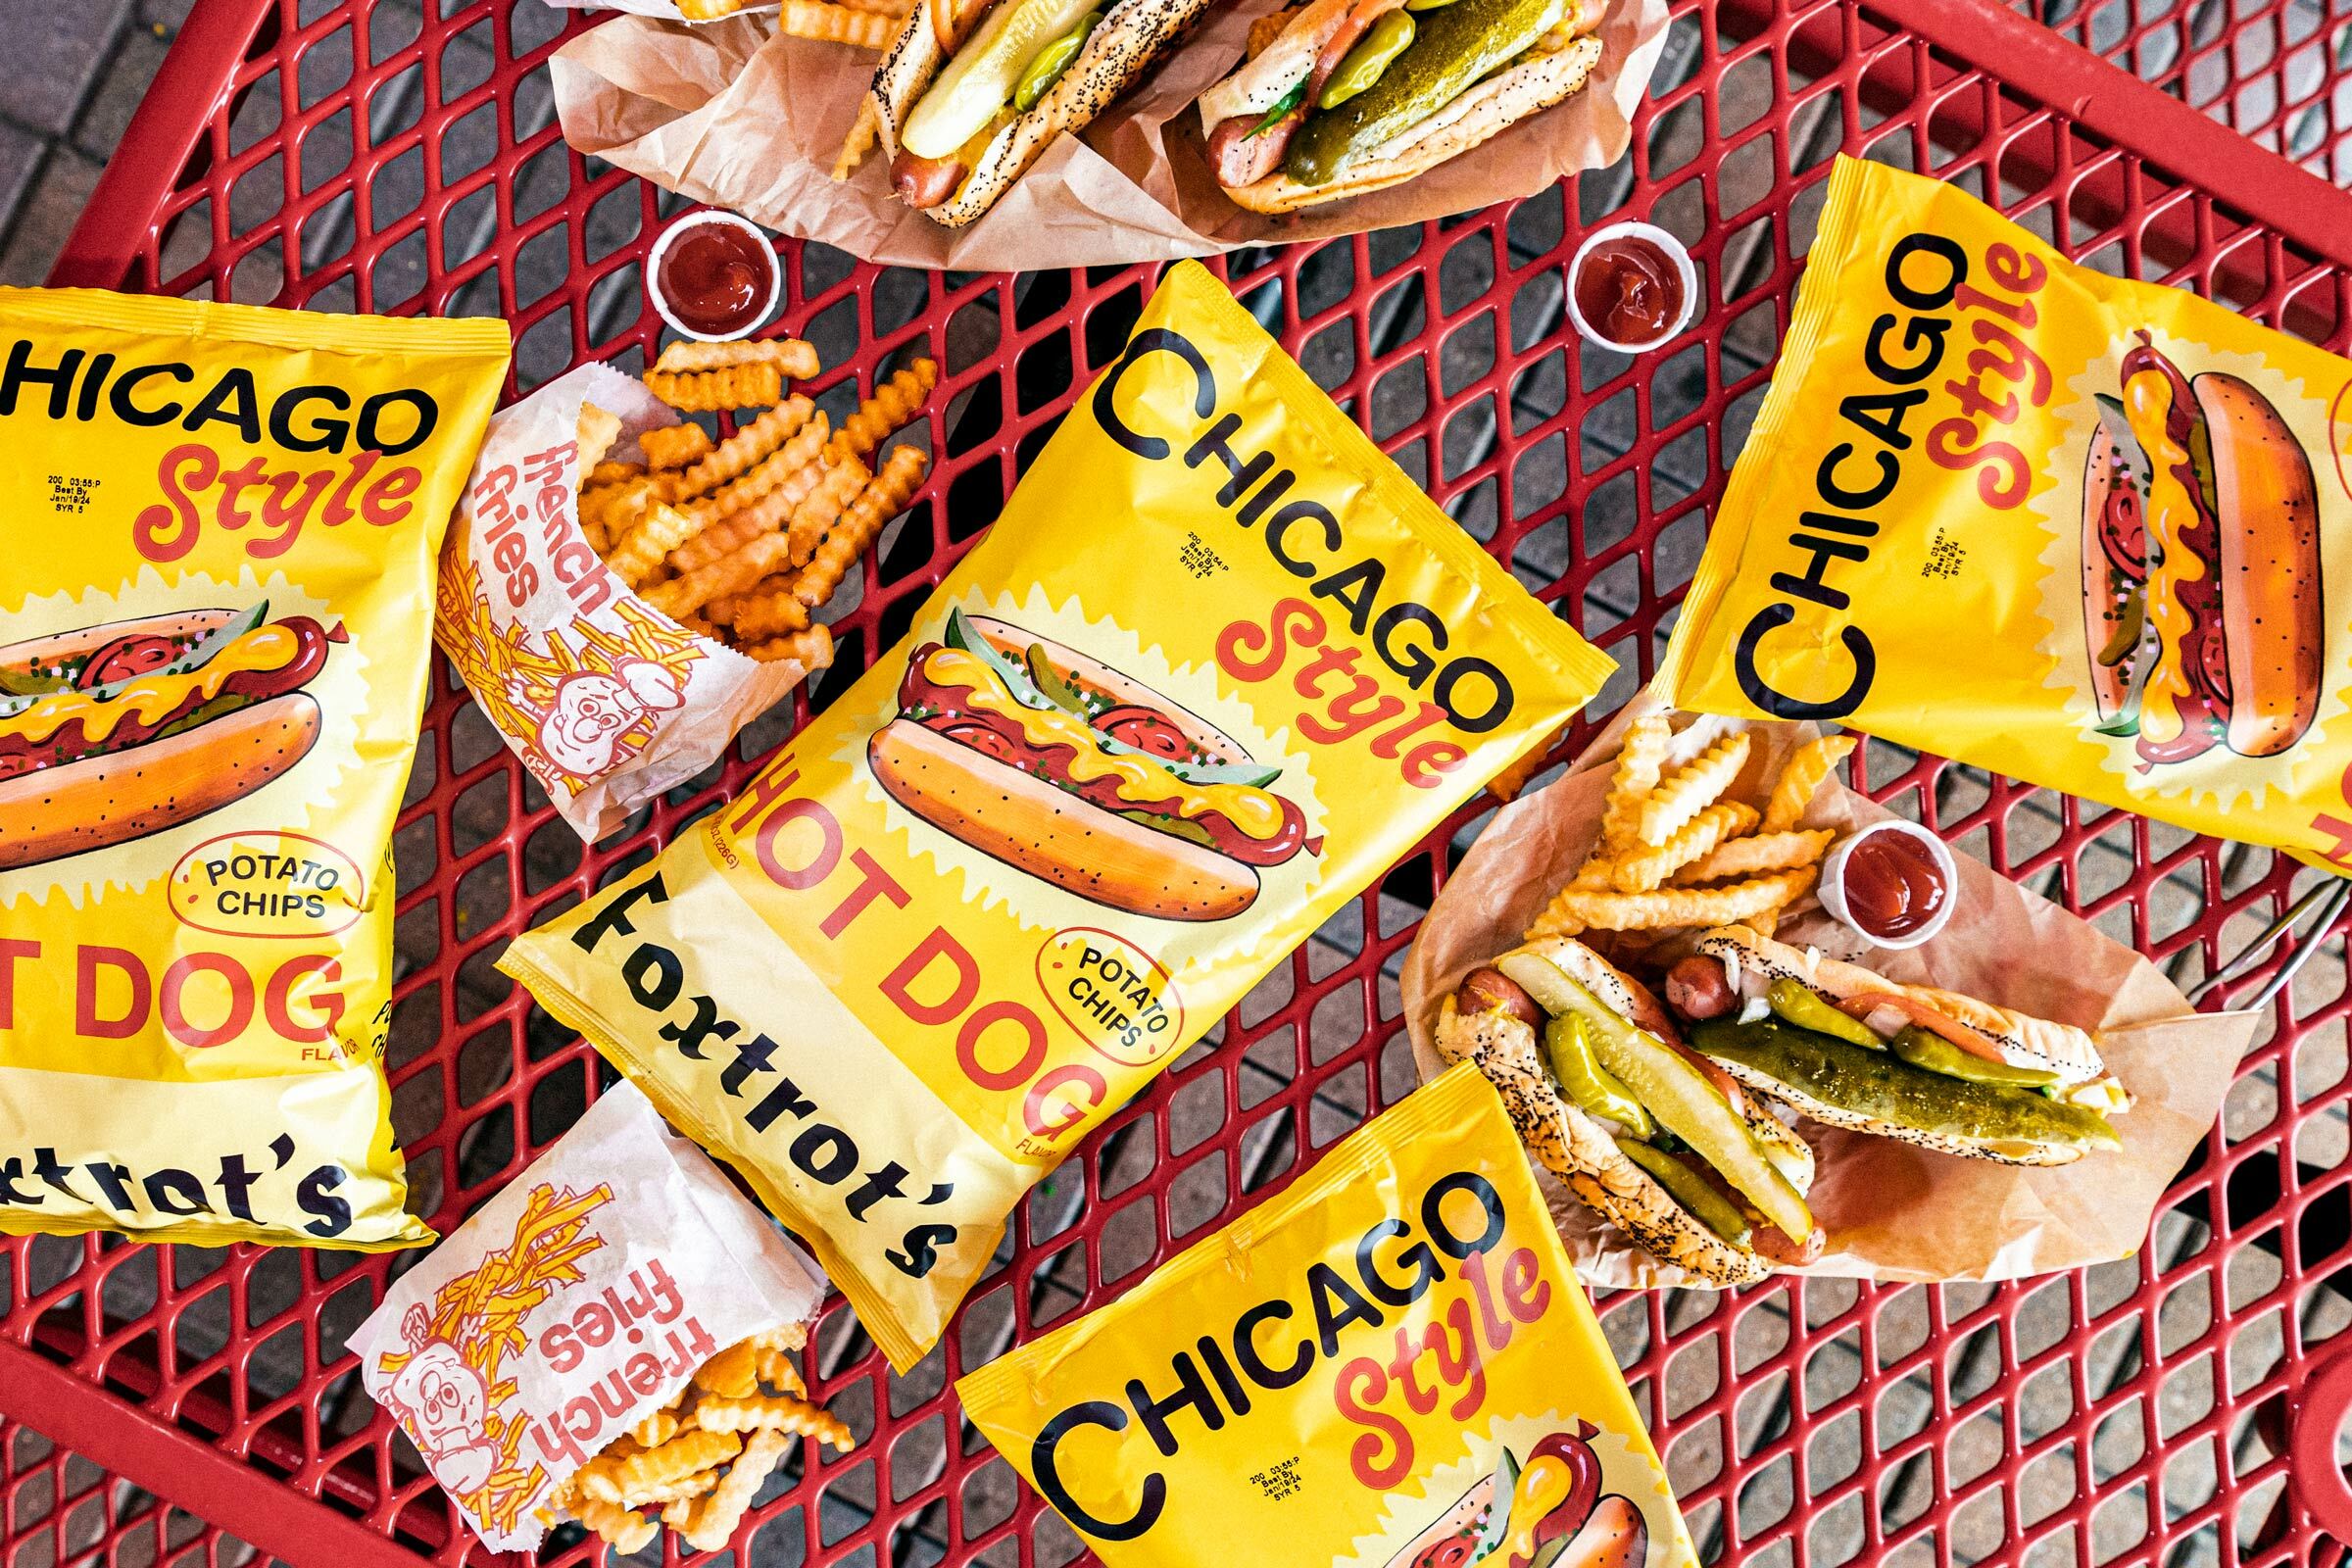 You can now buy Chicago hot dog-flavored potato chips - Time Out